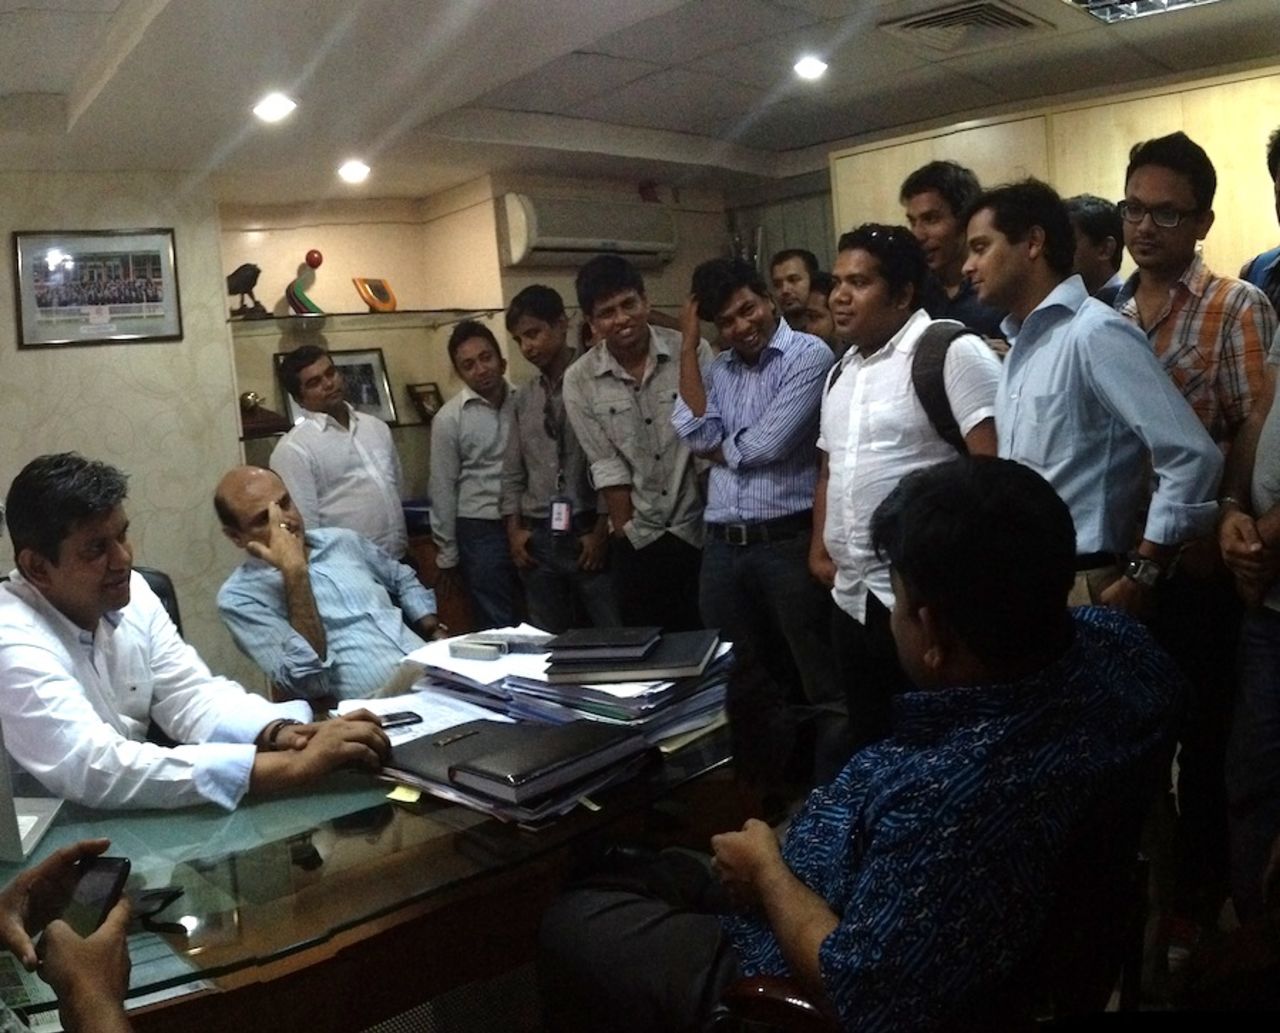 BCB interim committee member Jalal Yunus (right) explaining to the media that only the BCB president can make a statement regarding ACSU's investigation into alleged match and spot-fixing claims in the BPL. He is flanked by BCB's acting CEO  Nizamuddin Chowdhury whose office room was swarming with members of the Bangladesh media on Monday, June 3, 2013.